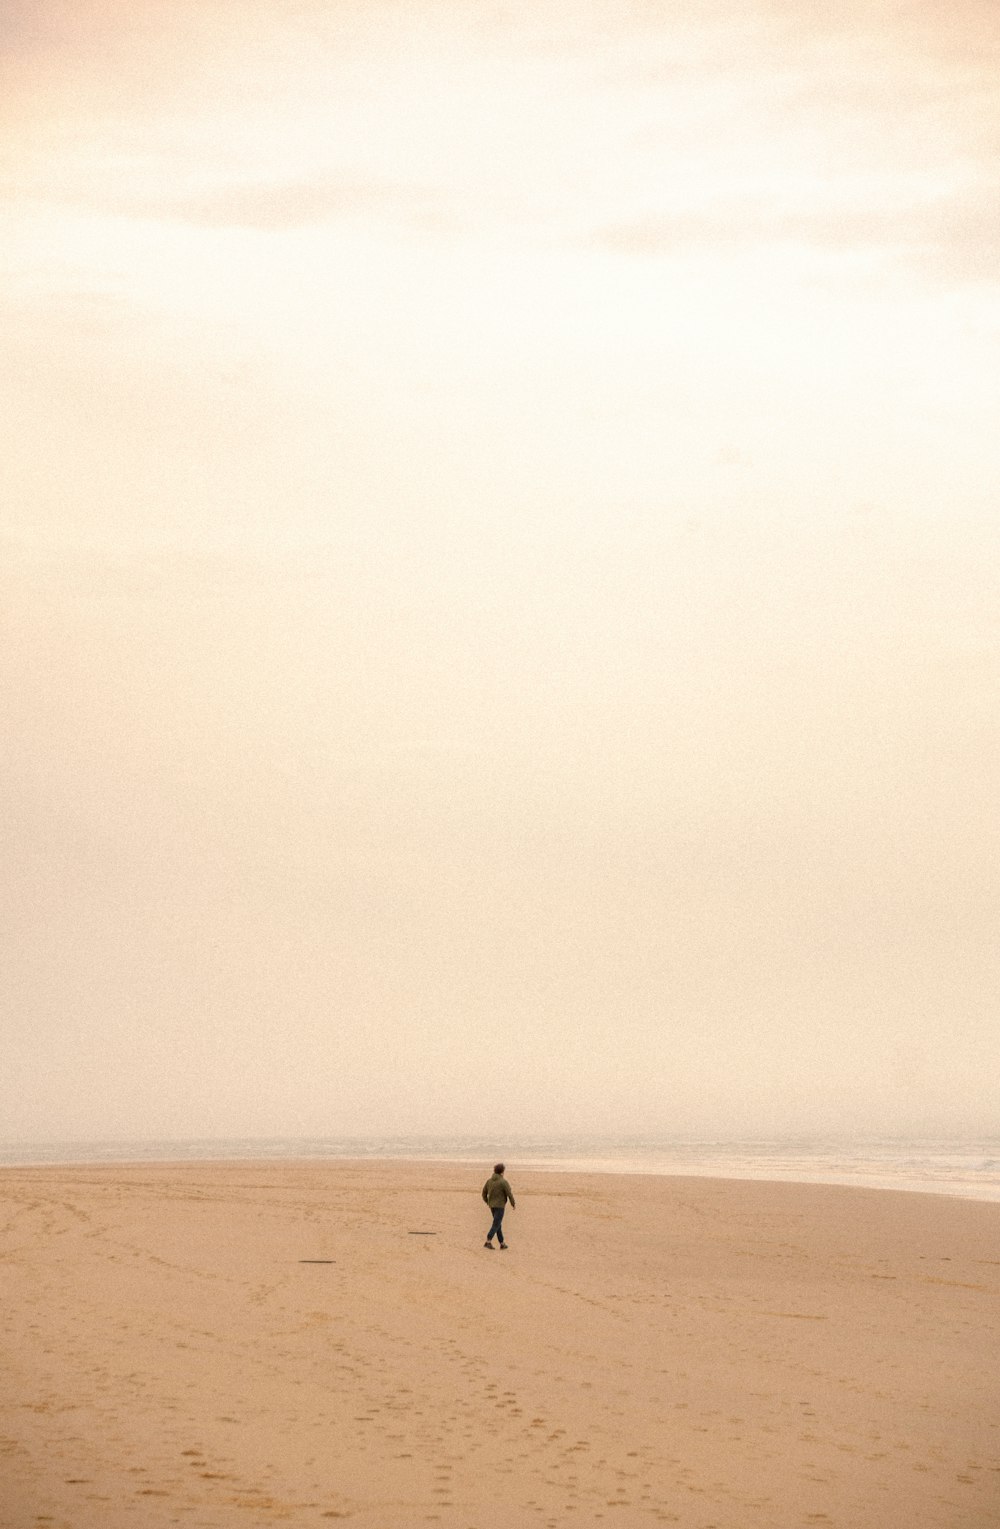 a person walking on a beach with a kite in the sky